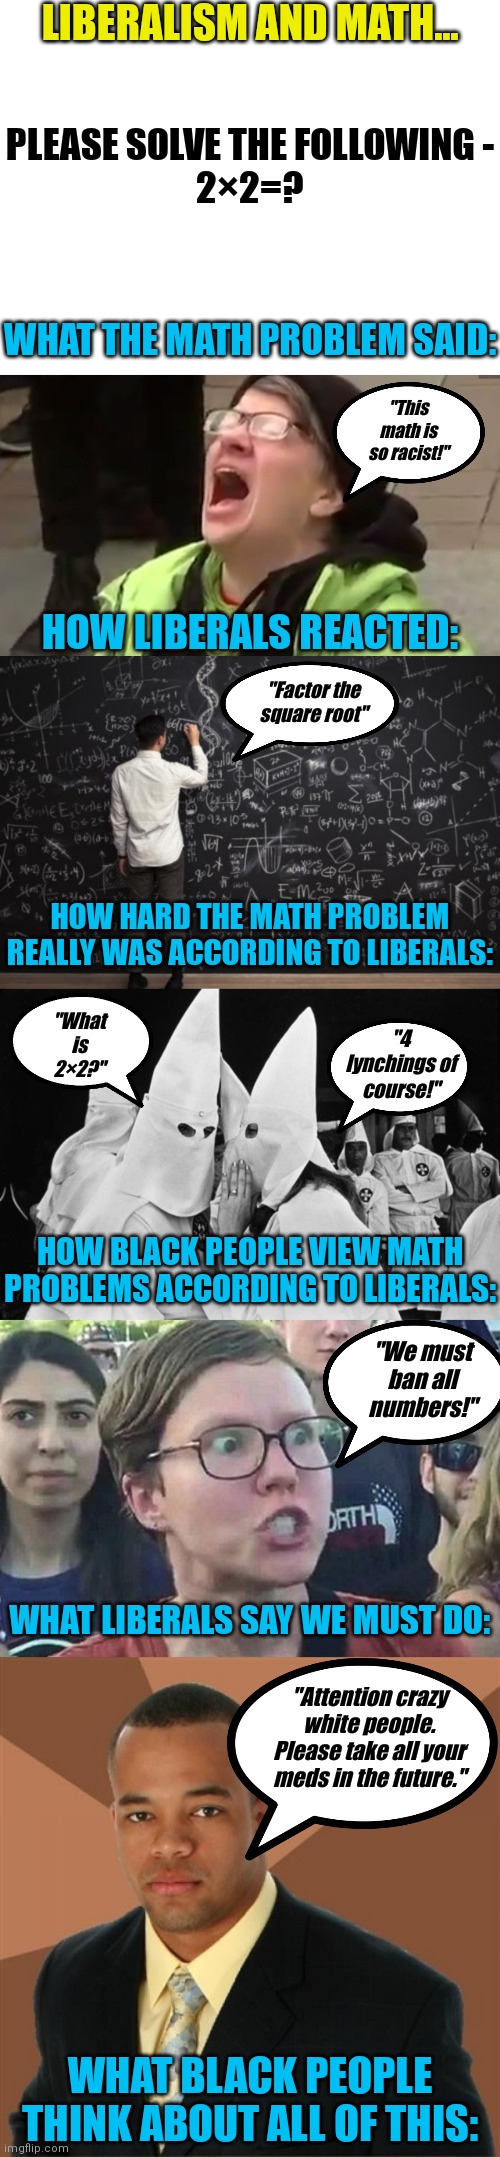 Liberals want to cheat minorities out of a proper education??! Who else is not surprised? | LIBERALISM AND MATH... PLEASE SOLVE THE FOLLOWING -
2×2=? WHAT THE MATH PROBLEM SAID:; "This math is so racist!"; HOW LIBERALS REACTED:; "Factor the square root"; HOW HARD THE MATH PROBLEM REALLY WAS ACCORDING TO LIBERALS:; "What is 2×2?"; "4 lynchings of course!"; HOW BLACK PEOPLE VIEW MATH PROBLEMS ACCORDING TO LIBERALS:; "We must ban all numbers!"; WHAT LIBERALS SAY WE MUST DO:; "Attention crazy white people. Please take all your meds in the future."; WHAT BLACK PEOPLE THINK ABOUT ALL OF THIS: | image tagged in blank white template,screaming liberal,math,kkk whispering,triggered liberal,stupid liberals | made w/ Imgflip meme maker